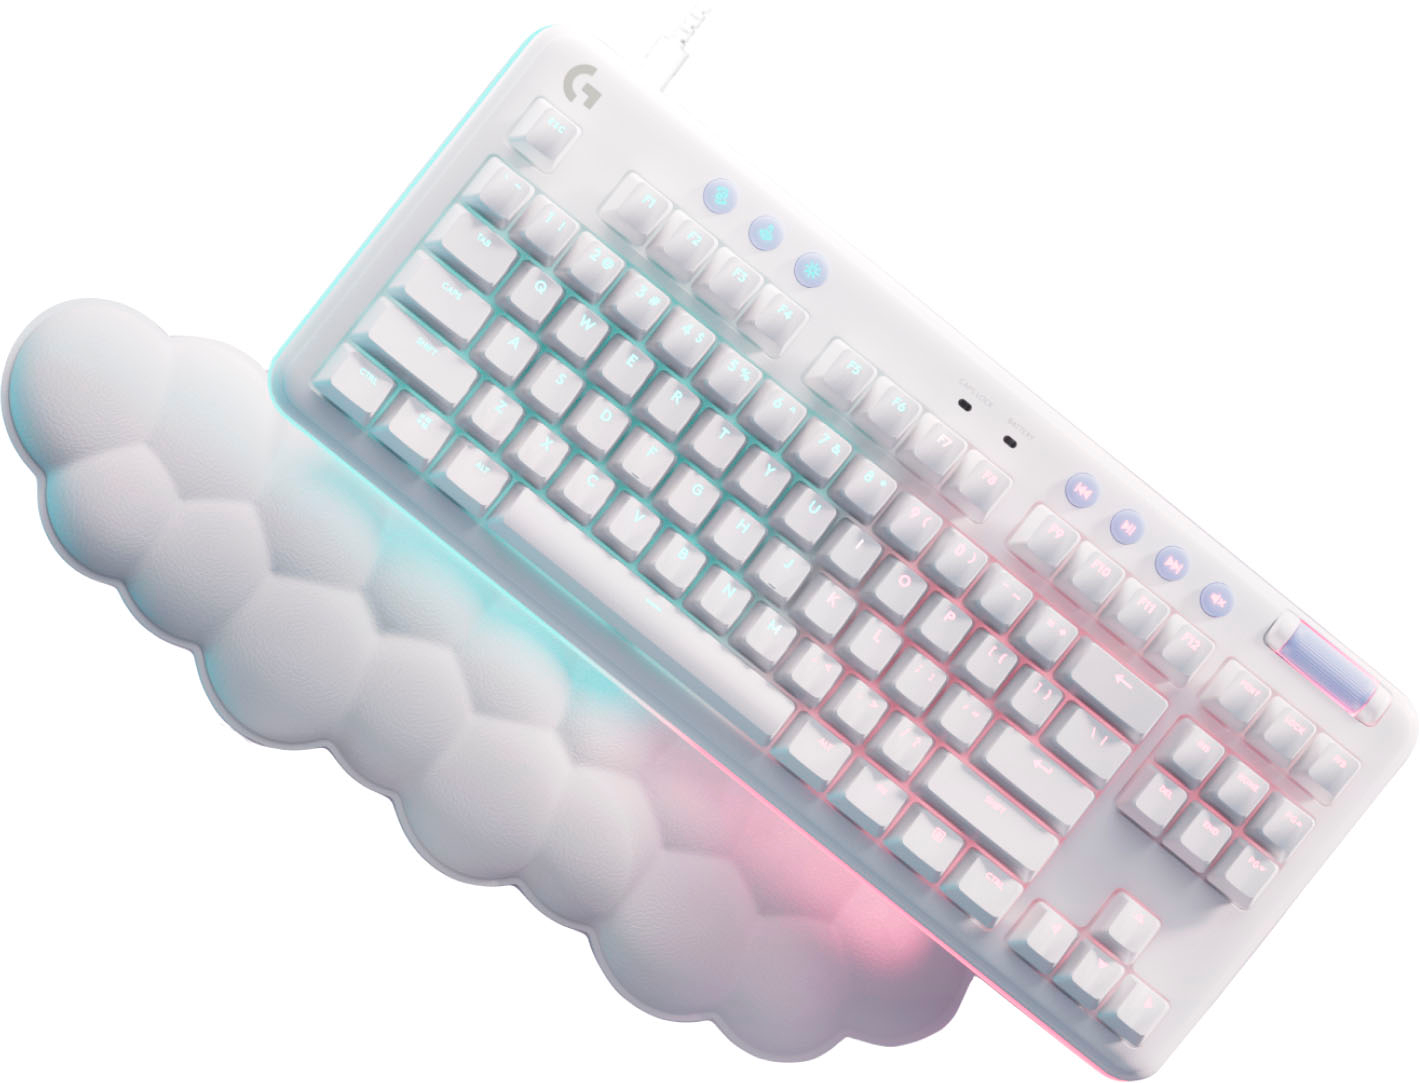 Logitech G713 Aurora Collection TKL Wired Mechanical Tactile Switch Keyboard for Palm Rest Included White Mist 920-010413 - Best Buy